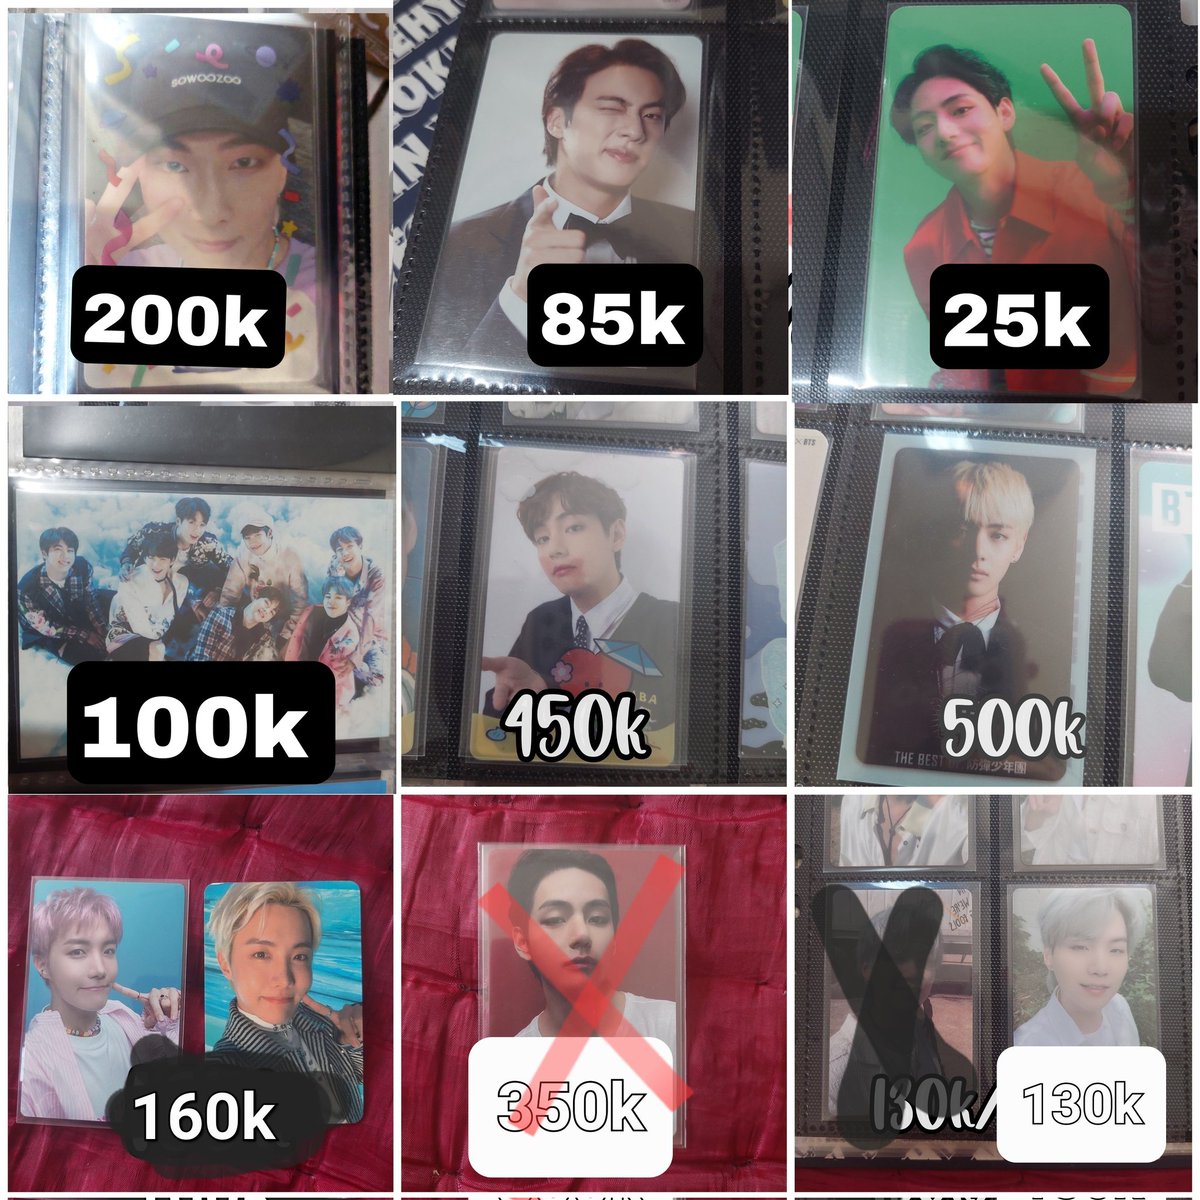 Want to sell❣️Wts 
ready ina!

Help rt🙏
☆bogor, ina
☆inc pack, exl adm
🌏Ww shipping
No refund no return

T. Bts yescard dicon 102 yes card mpc special card in the soop dfesta tae rante namjoon bluray sowoozoo the fact china photobook dicon hyyh proof collector wings ld m2u